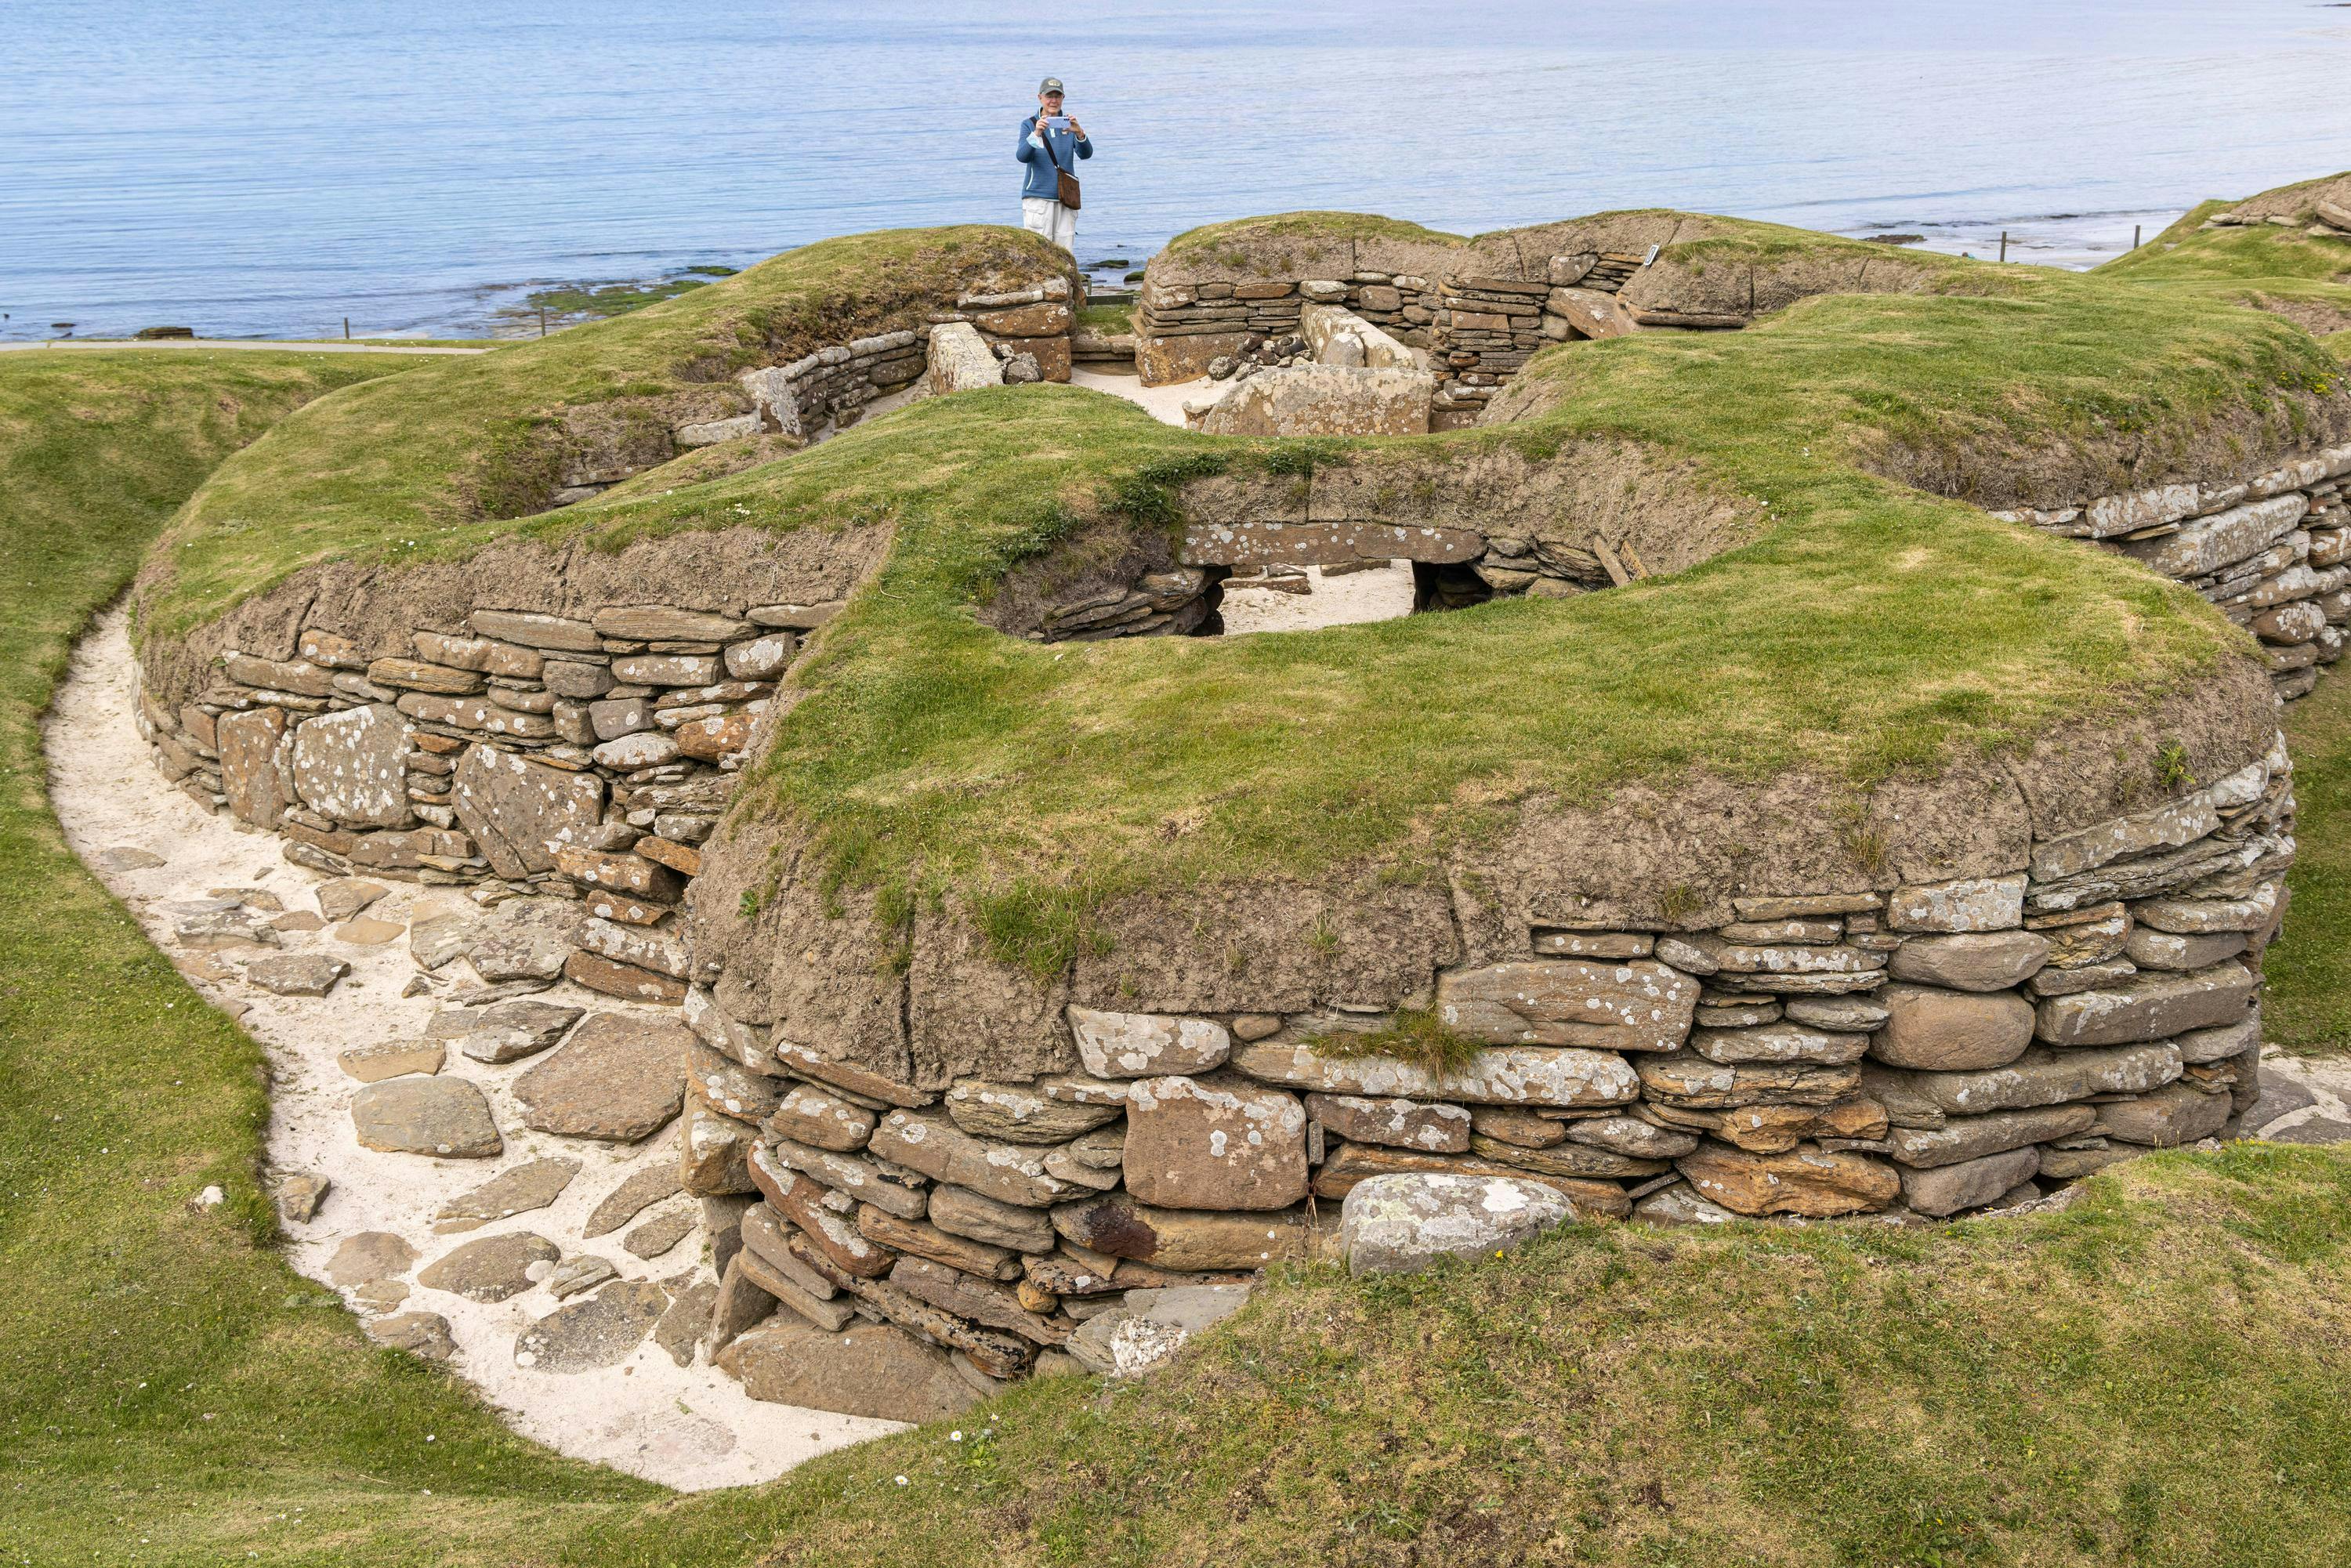 Guests visiting Skara Brae, a Neolithic settlement located in the Mainland Orkney Islands, Scotland